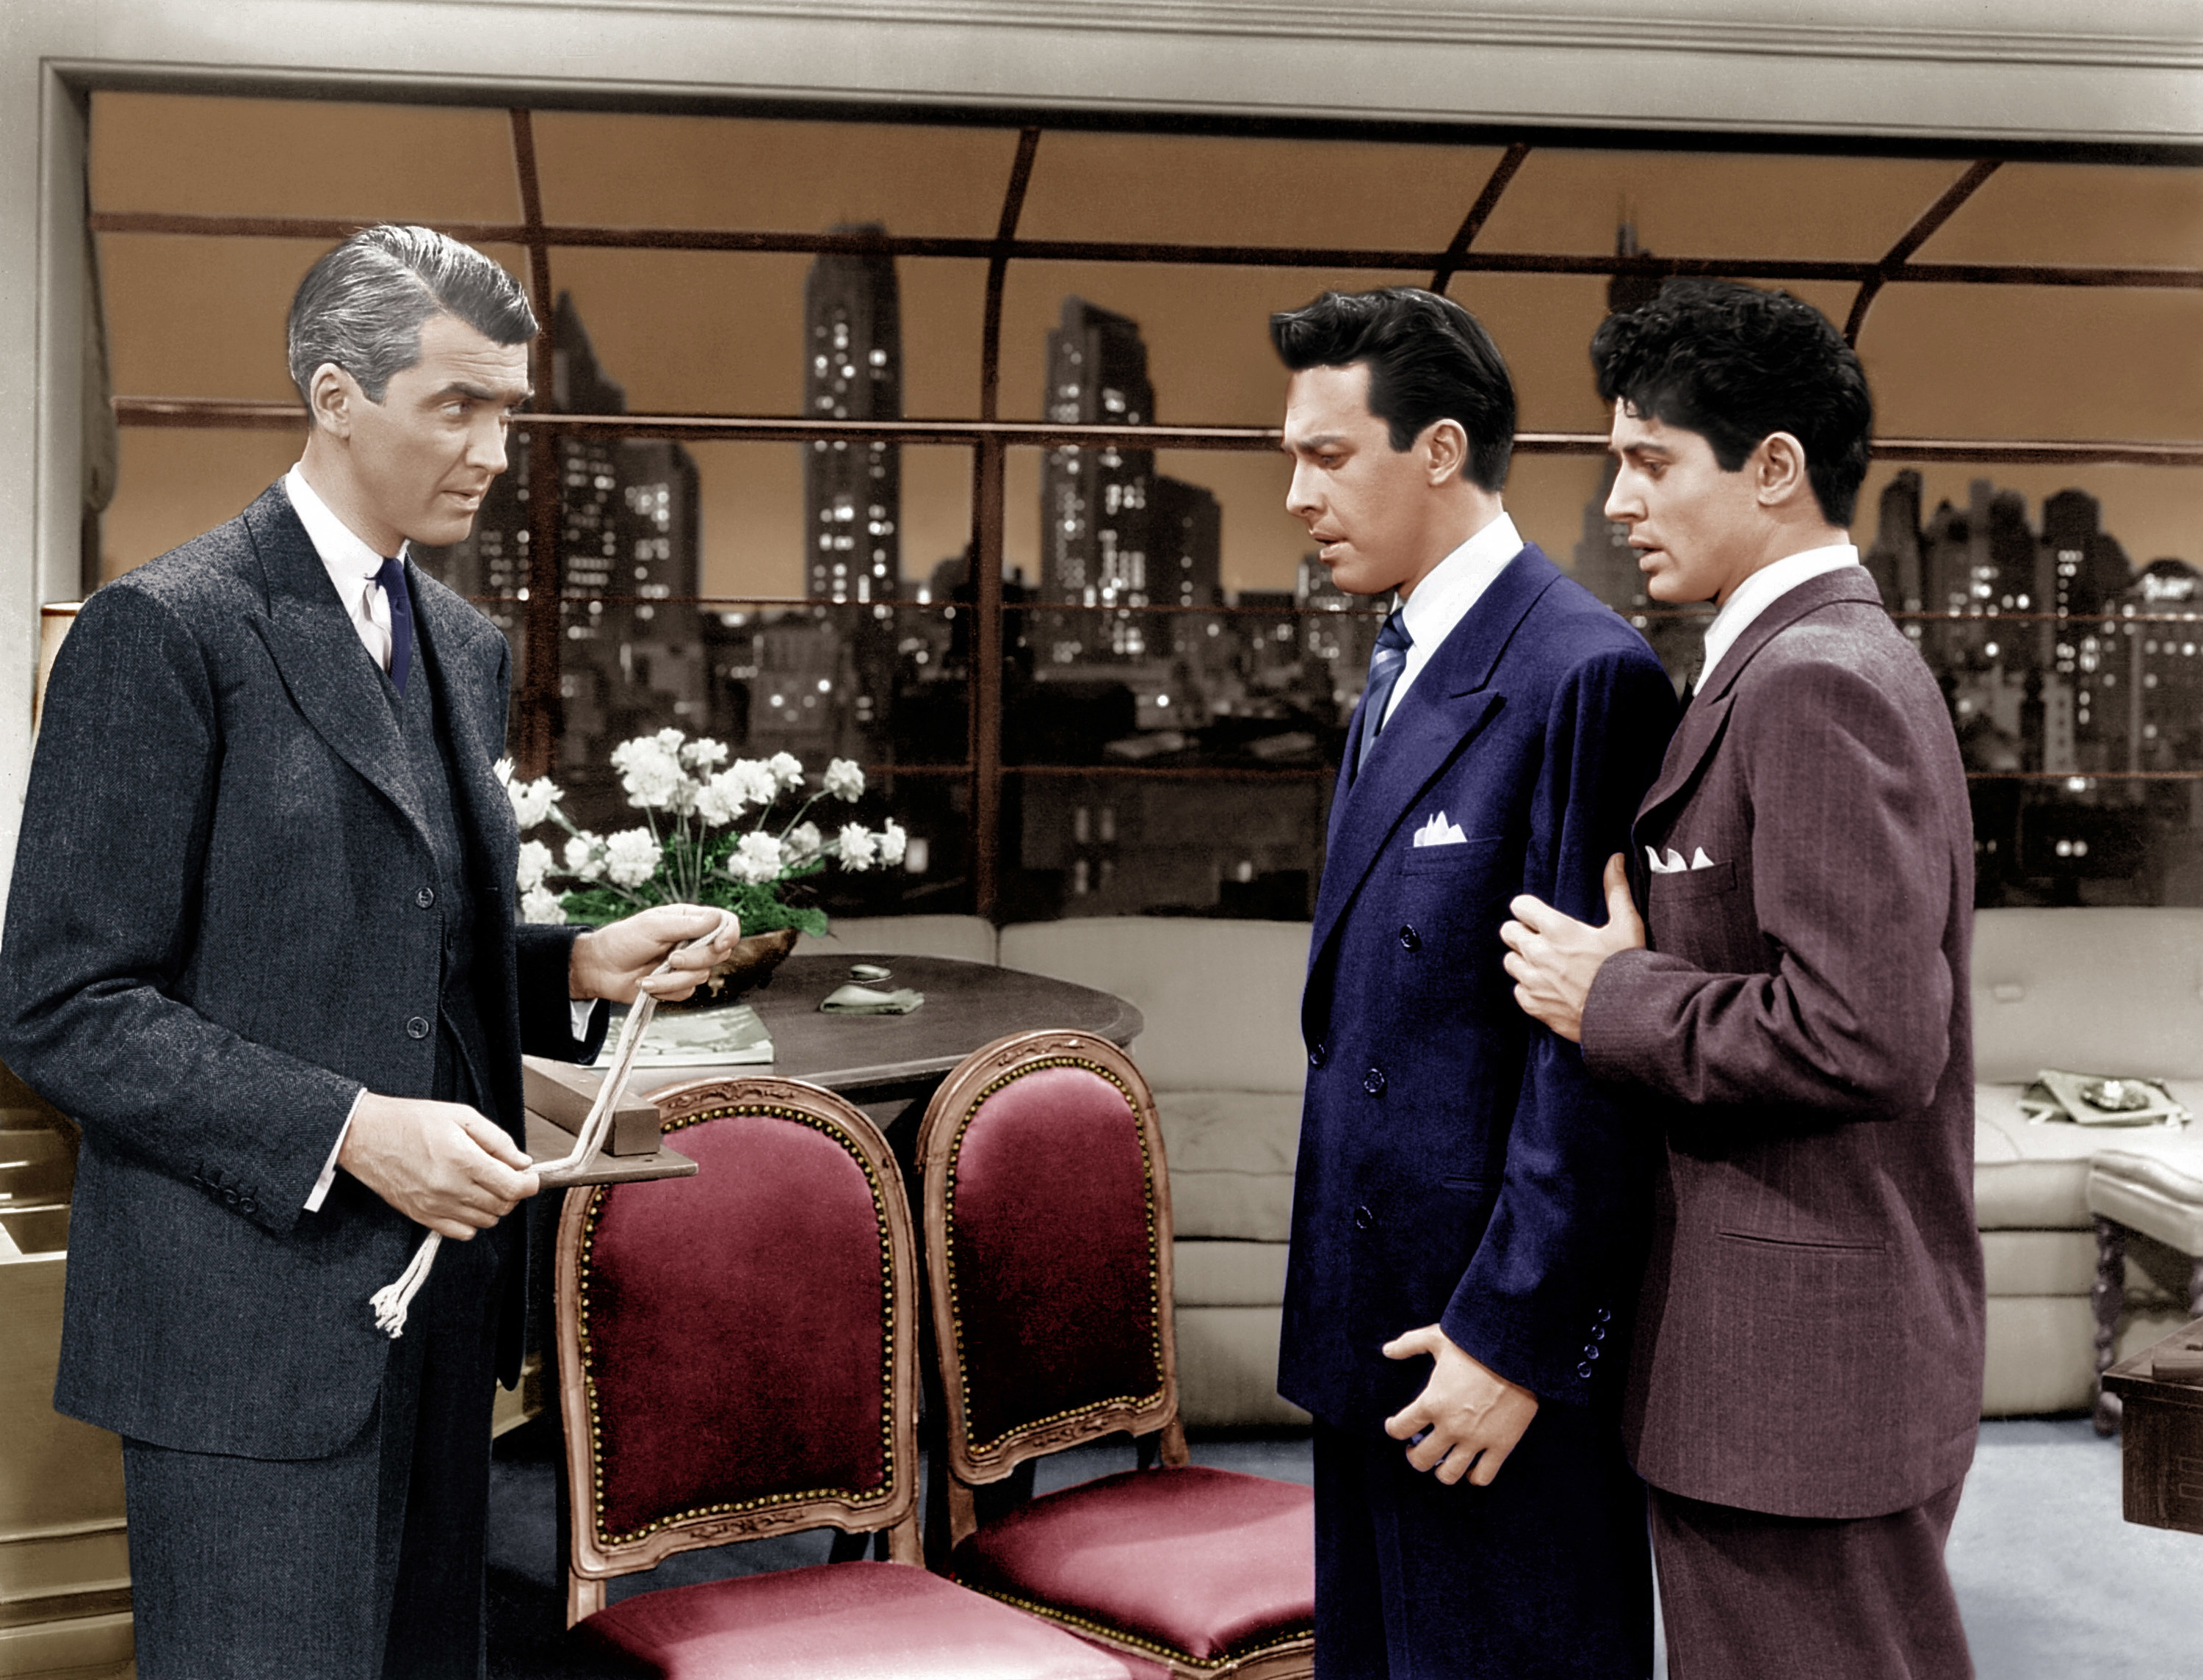 James Stewart, John Dall, and Farley Granger in &quot;Rope&quot;